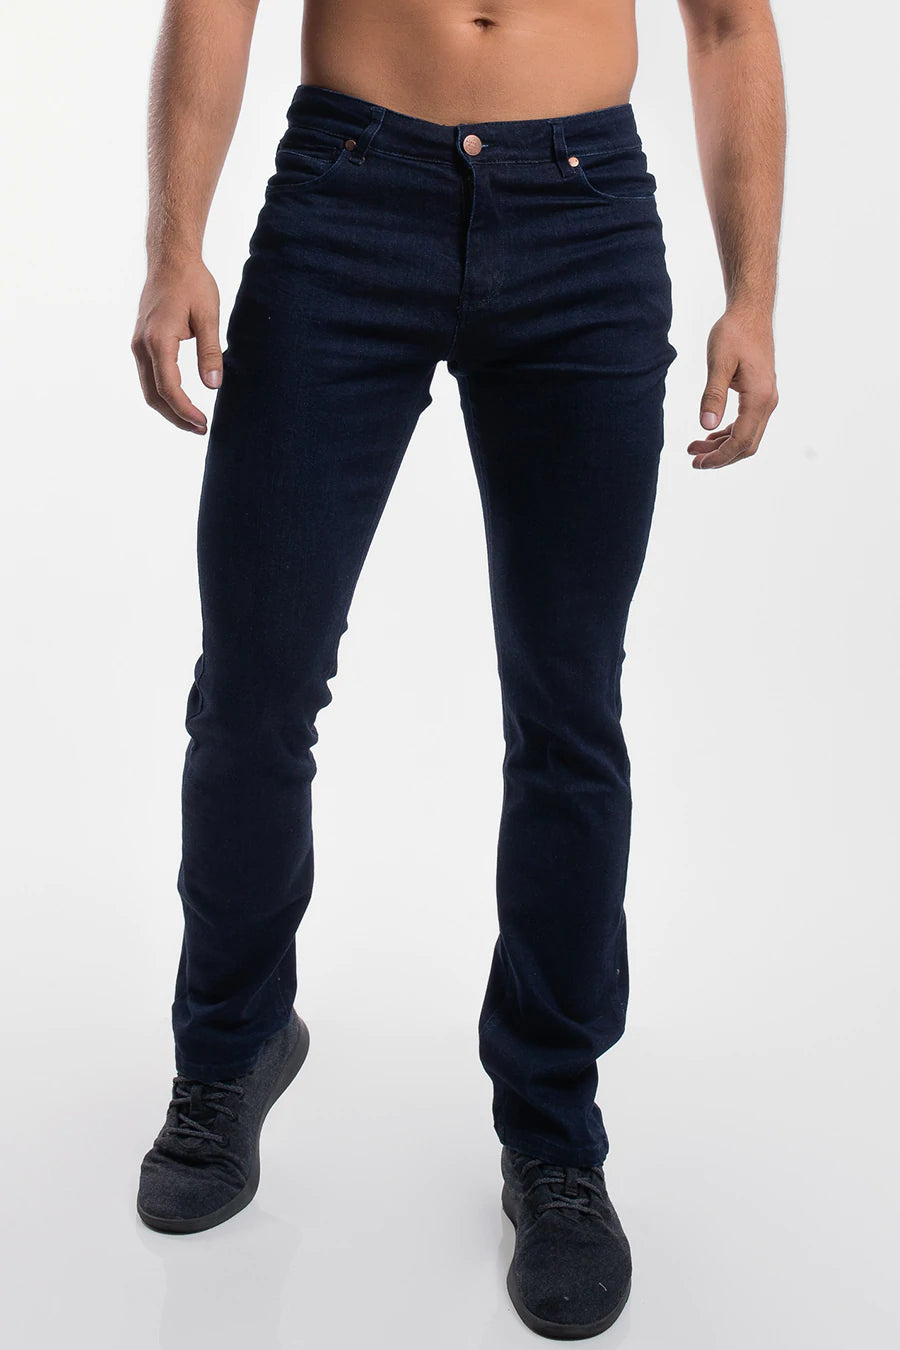 Boot Cut Athletic Fit  - Dark Rinse - photo from front in focus #color_dark-rinse